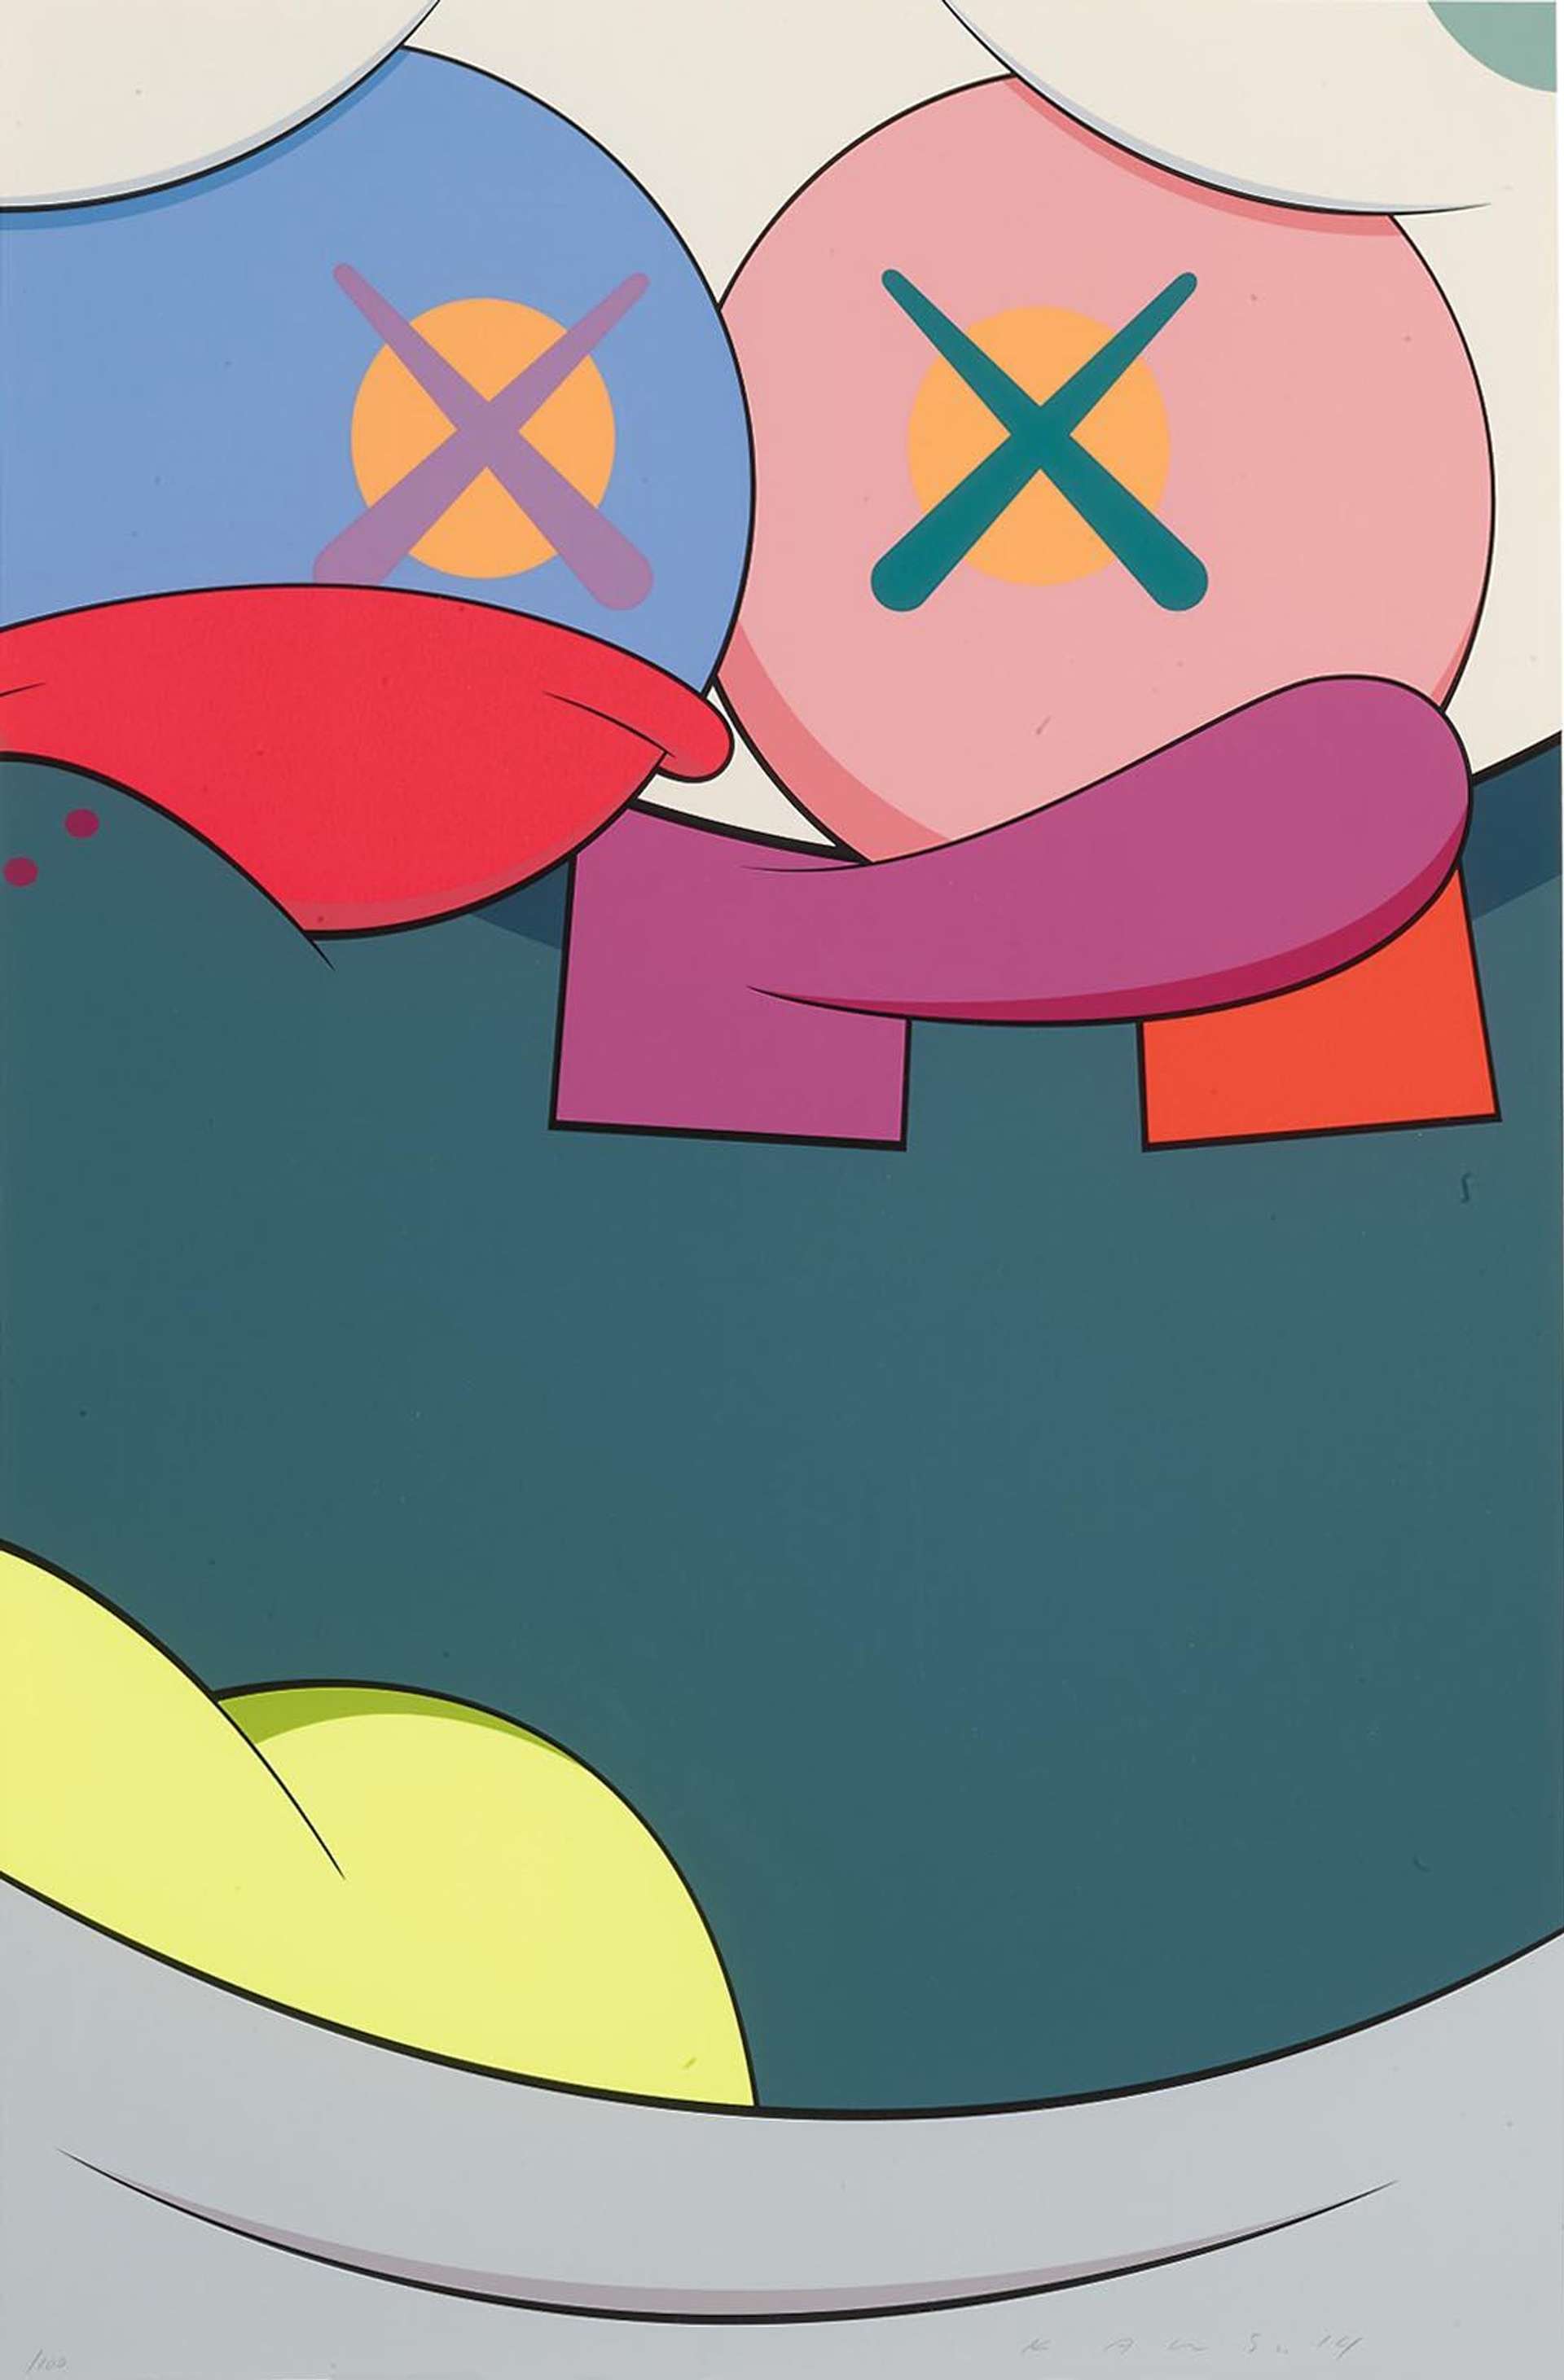 KAWS’ Blame Game VII. A screenprint of the cartoon character, Spongebob, with muted grey tones of yellow and green. His eyes have x marks on them and are different colours.